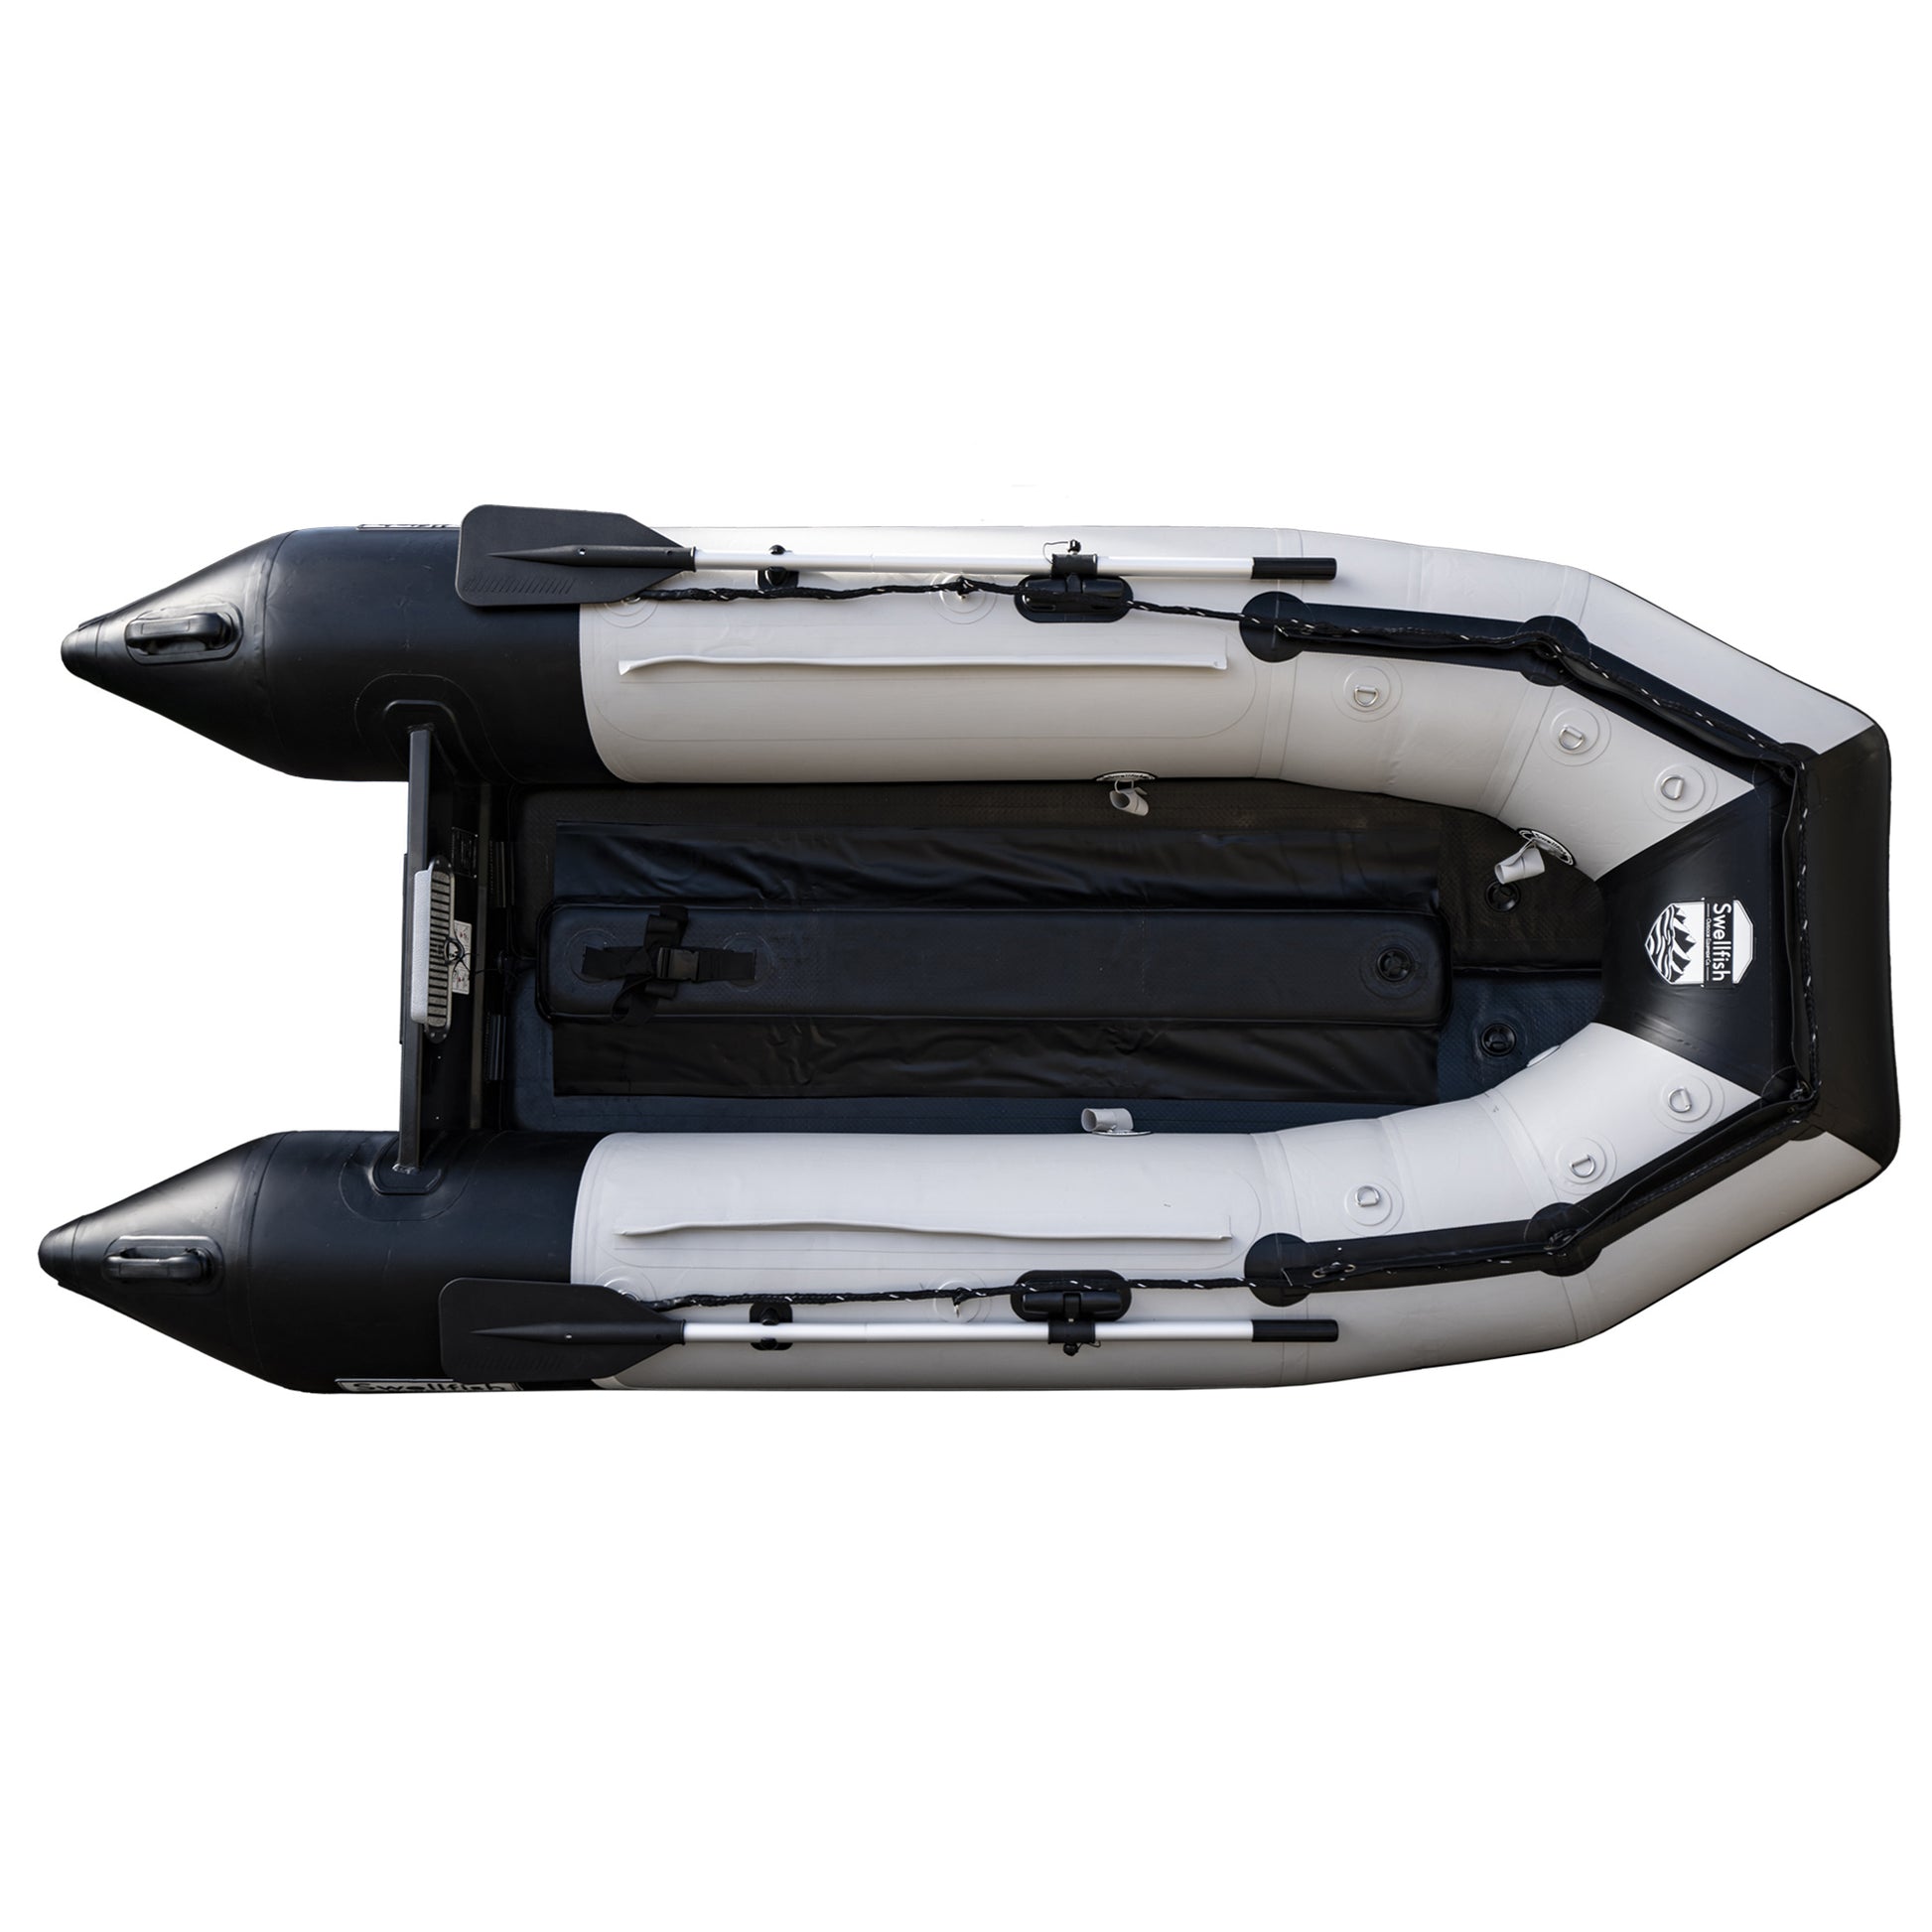 FS Ultralight Inflatable Boat 250